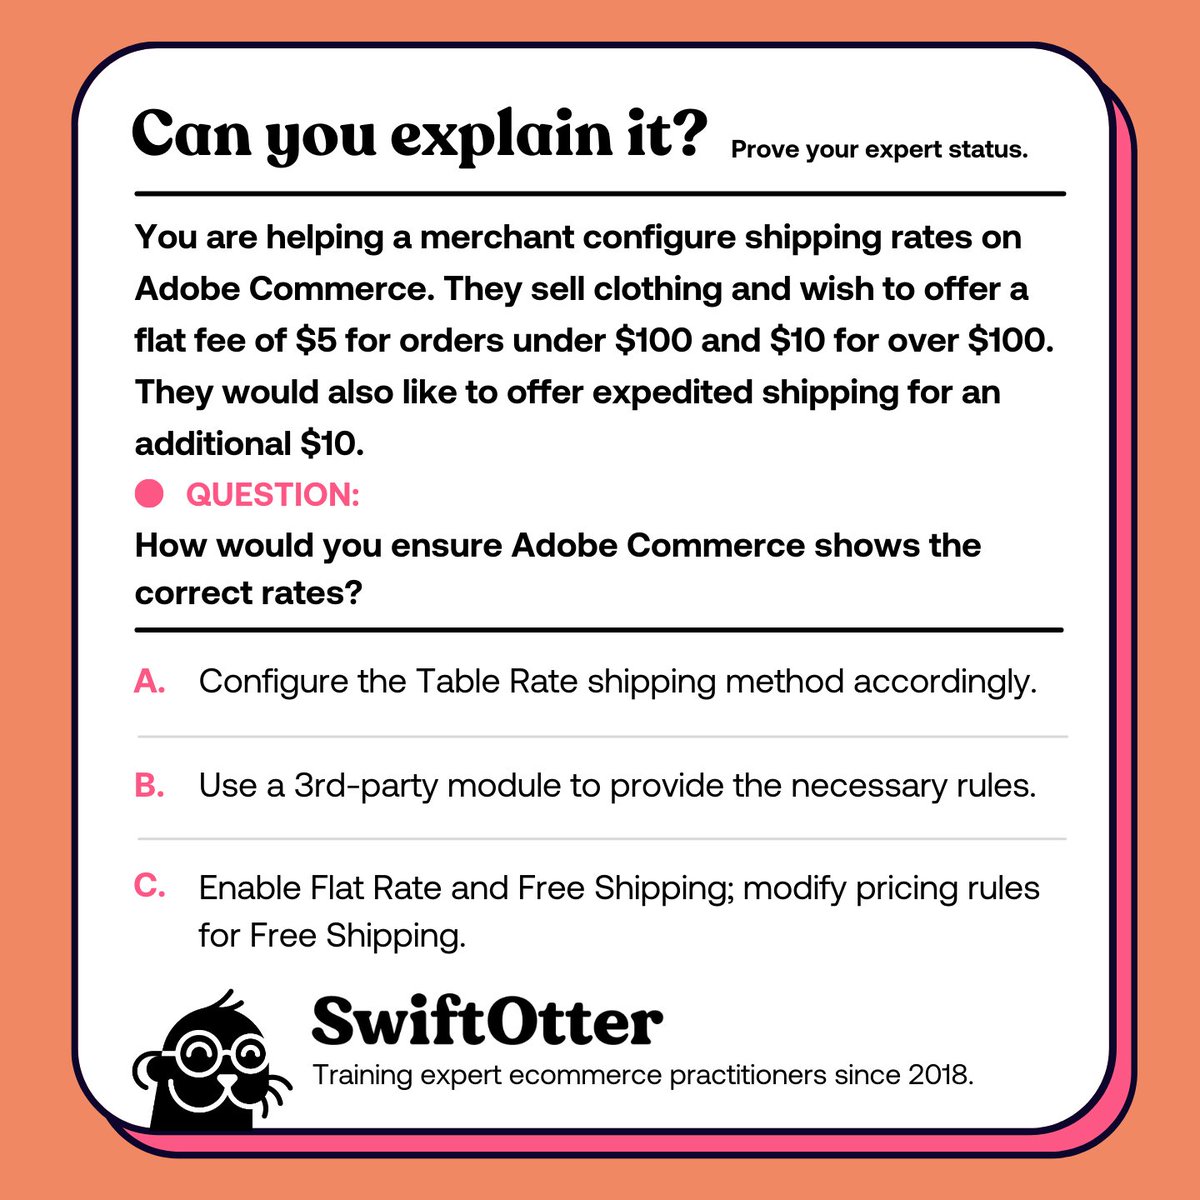 Let's configure some shipping rates for a merchant! How do we ensure Adobe Commerce shows all of these shipping rates correctly?
➡️ Reply with your answer and reasoning.
#swiftotter #magento #magentodeveloper #adobecommerce #weeklypracticequestion